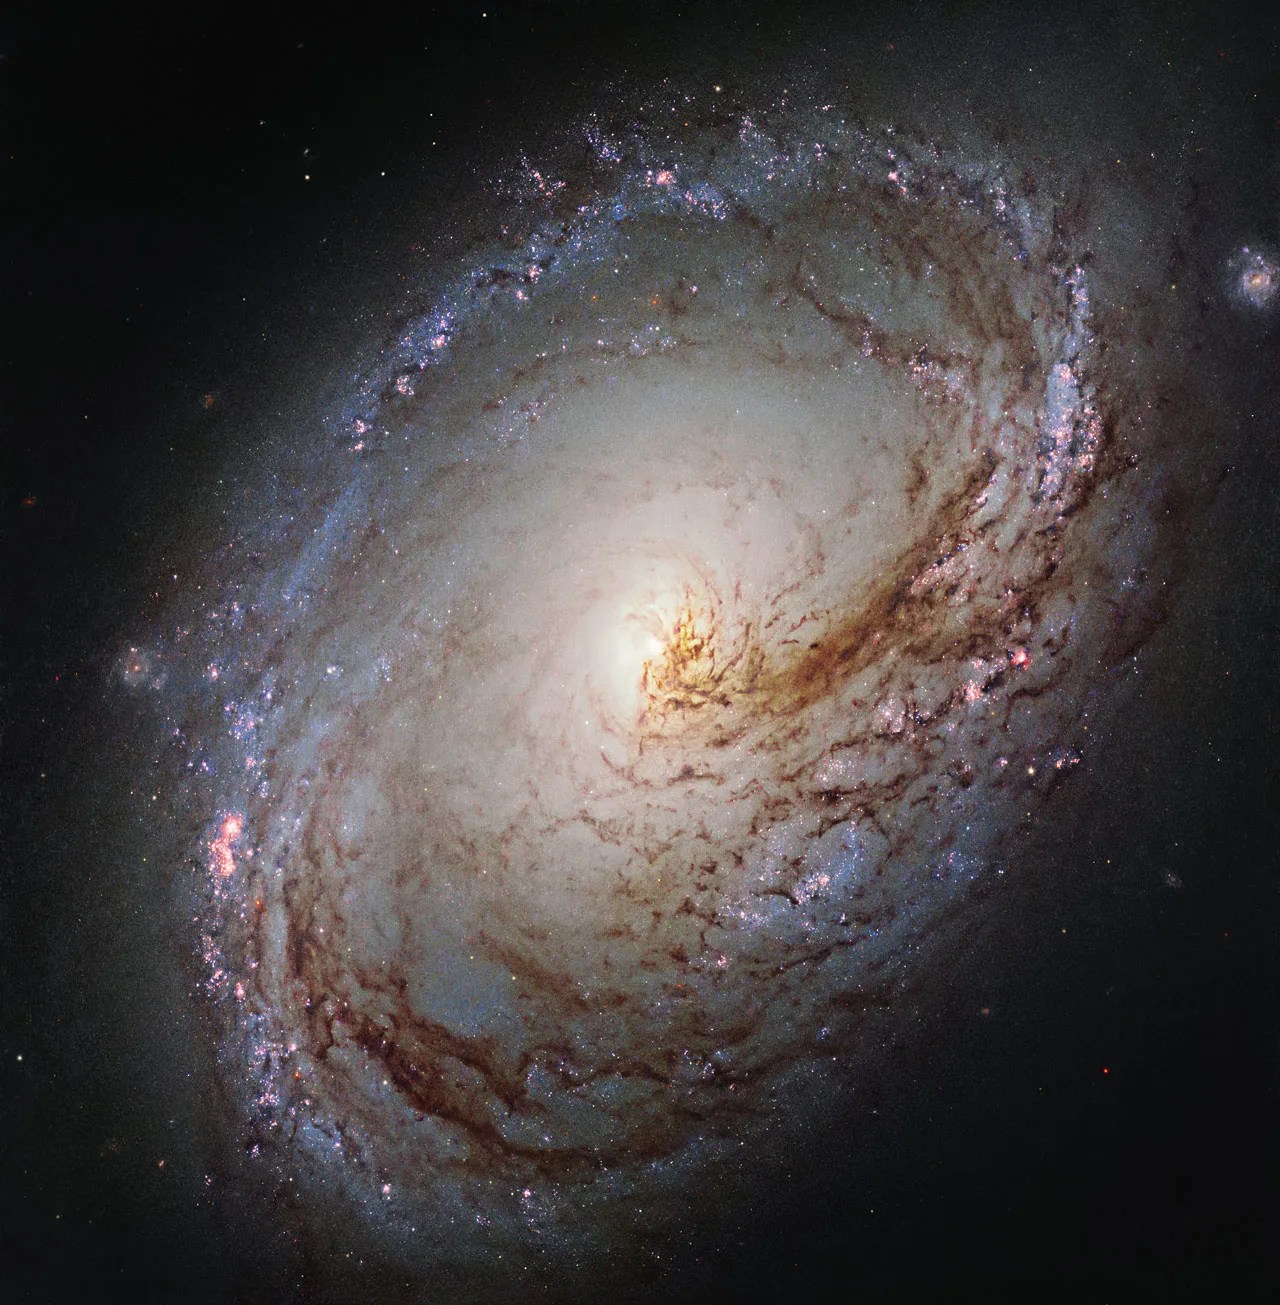 The galaxy resembles a giant maelstrom of glowing gas, rippled with dark dust that swirls inwards towards the nucleus.